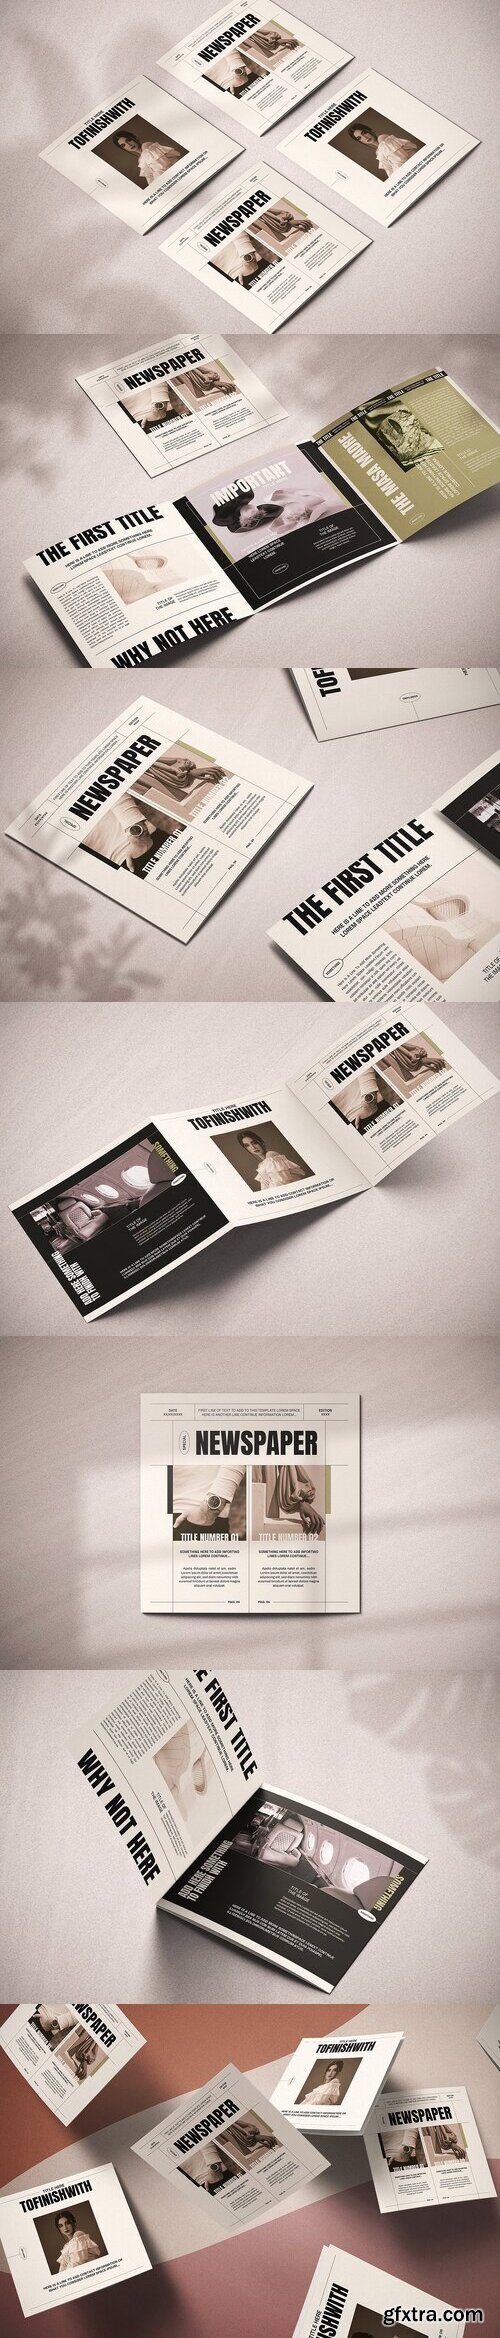 CreativeMarket - The Great Newspaper Square Trifold 7389548